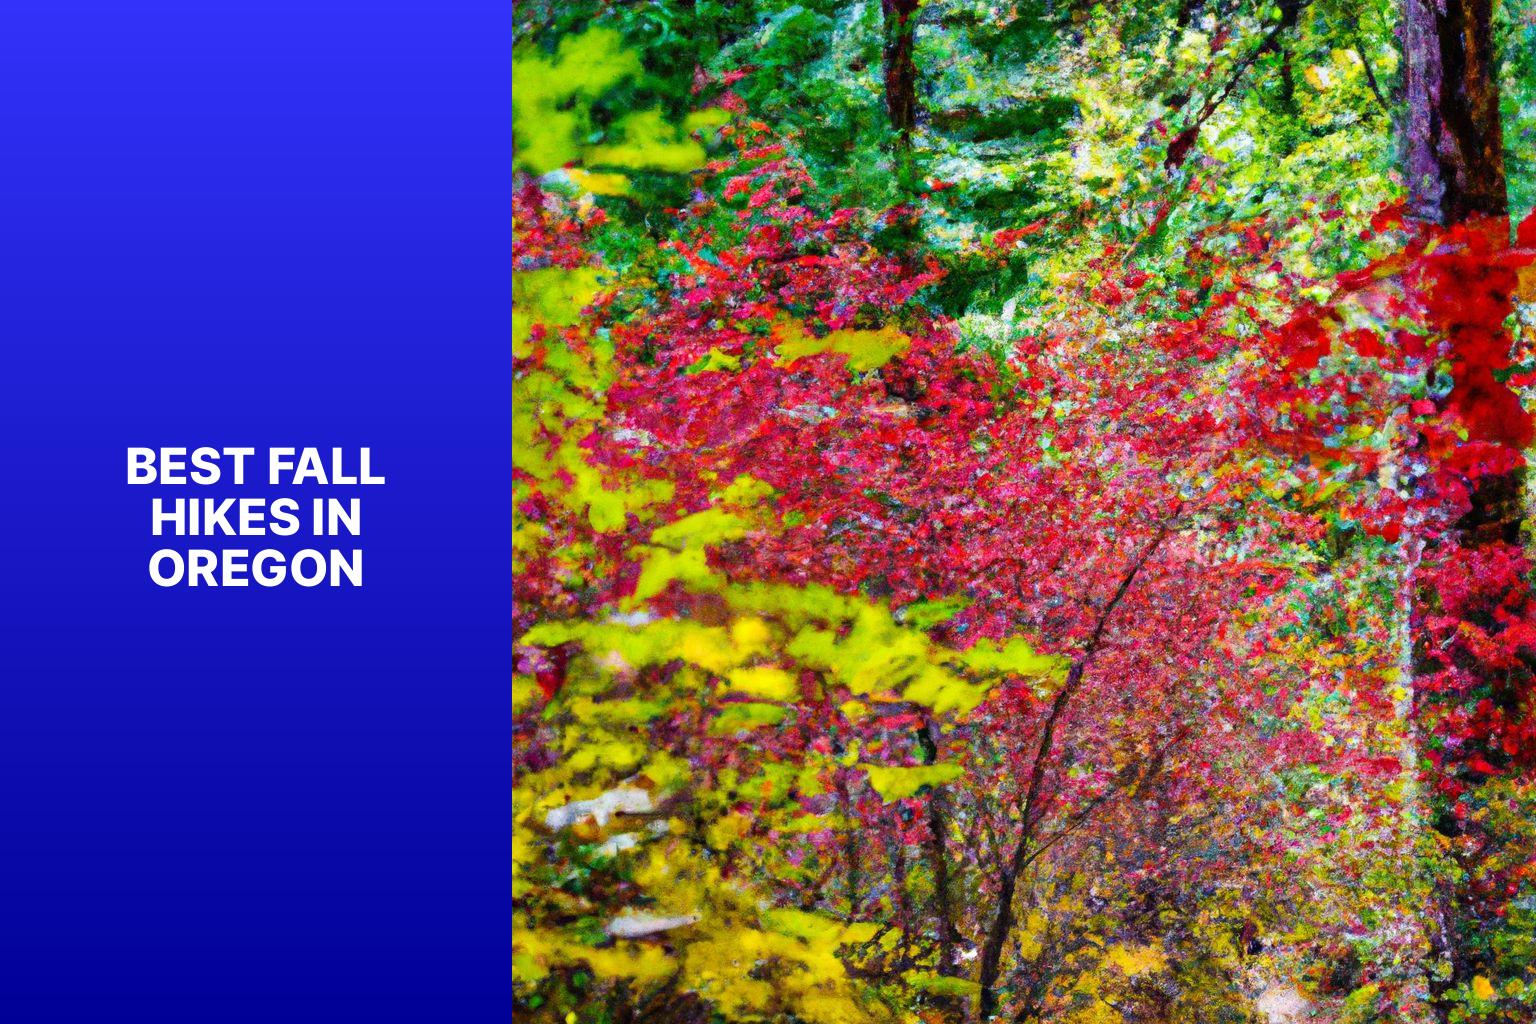 best fall hikes in oregon91kl